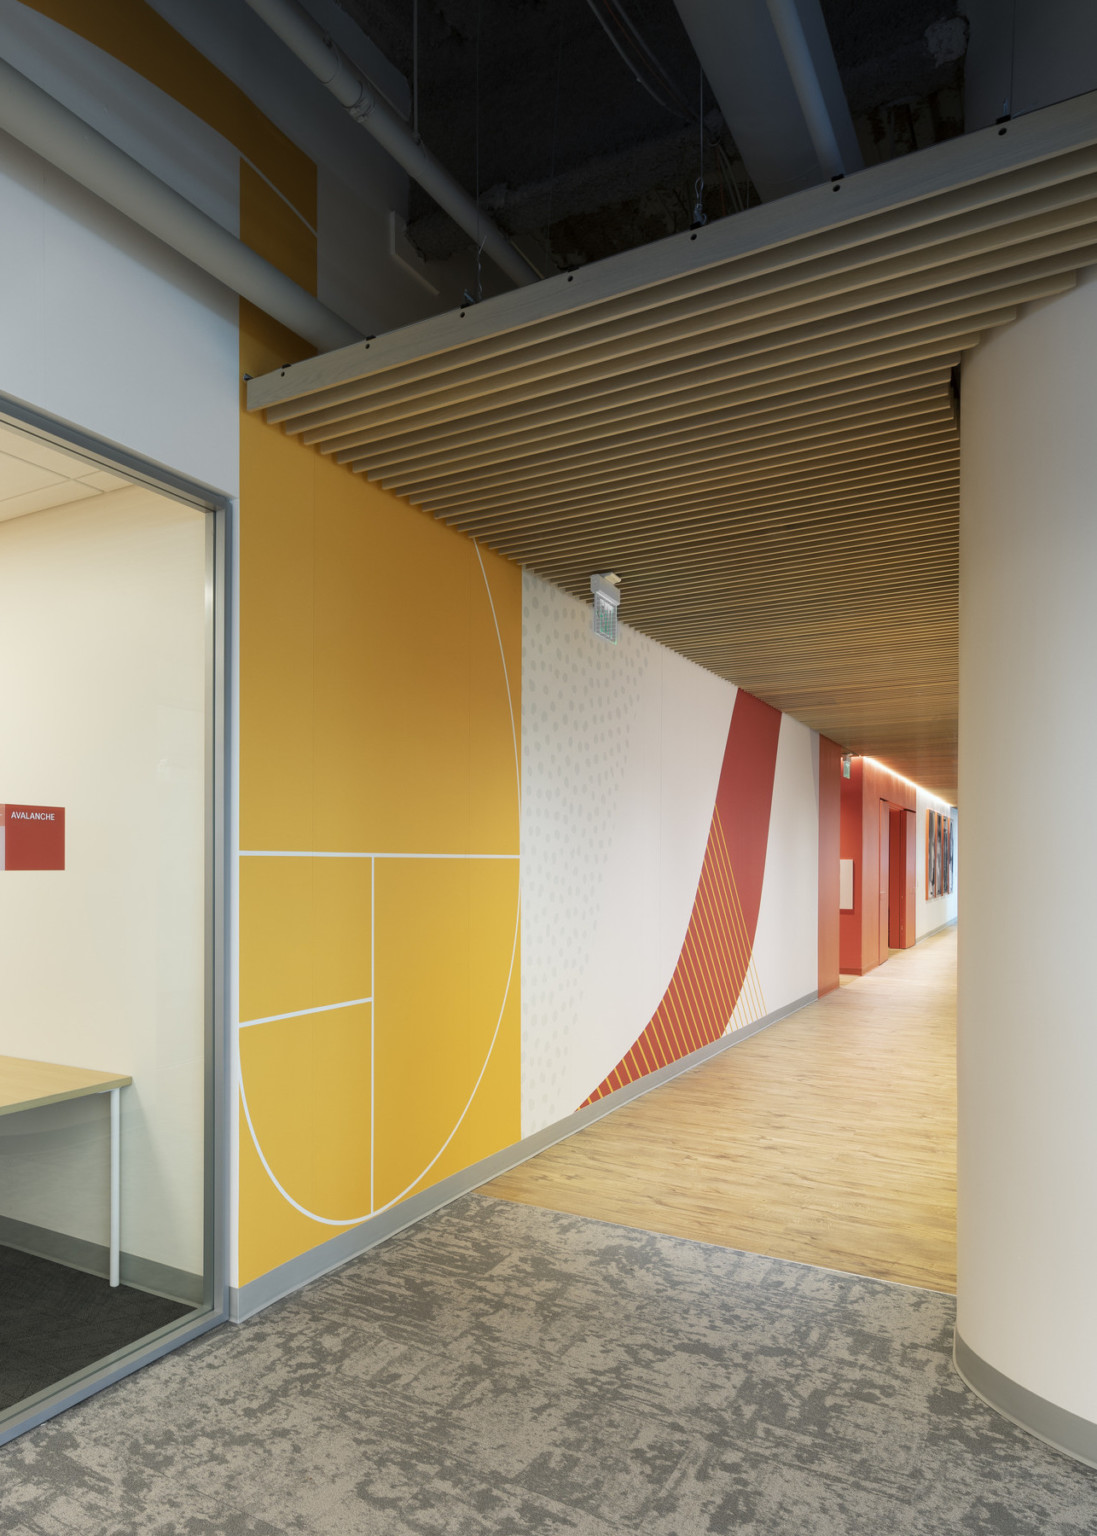 Entrance to hallway with orange, white, and yellow abstract mural on left wall below wood slat drop ceiling